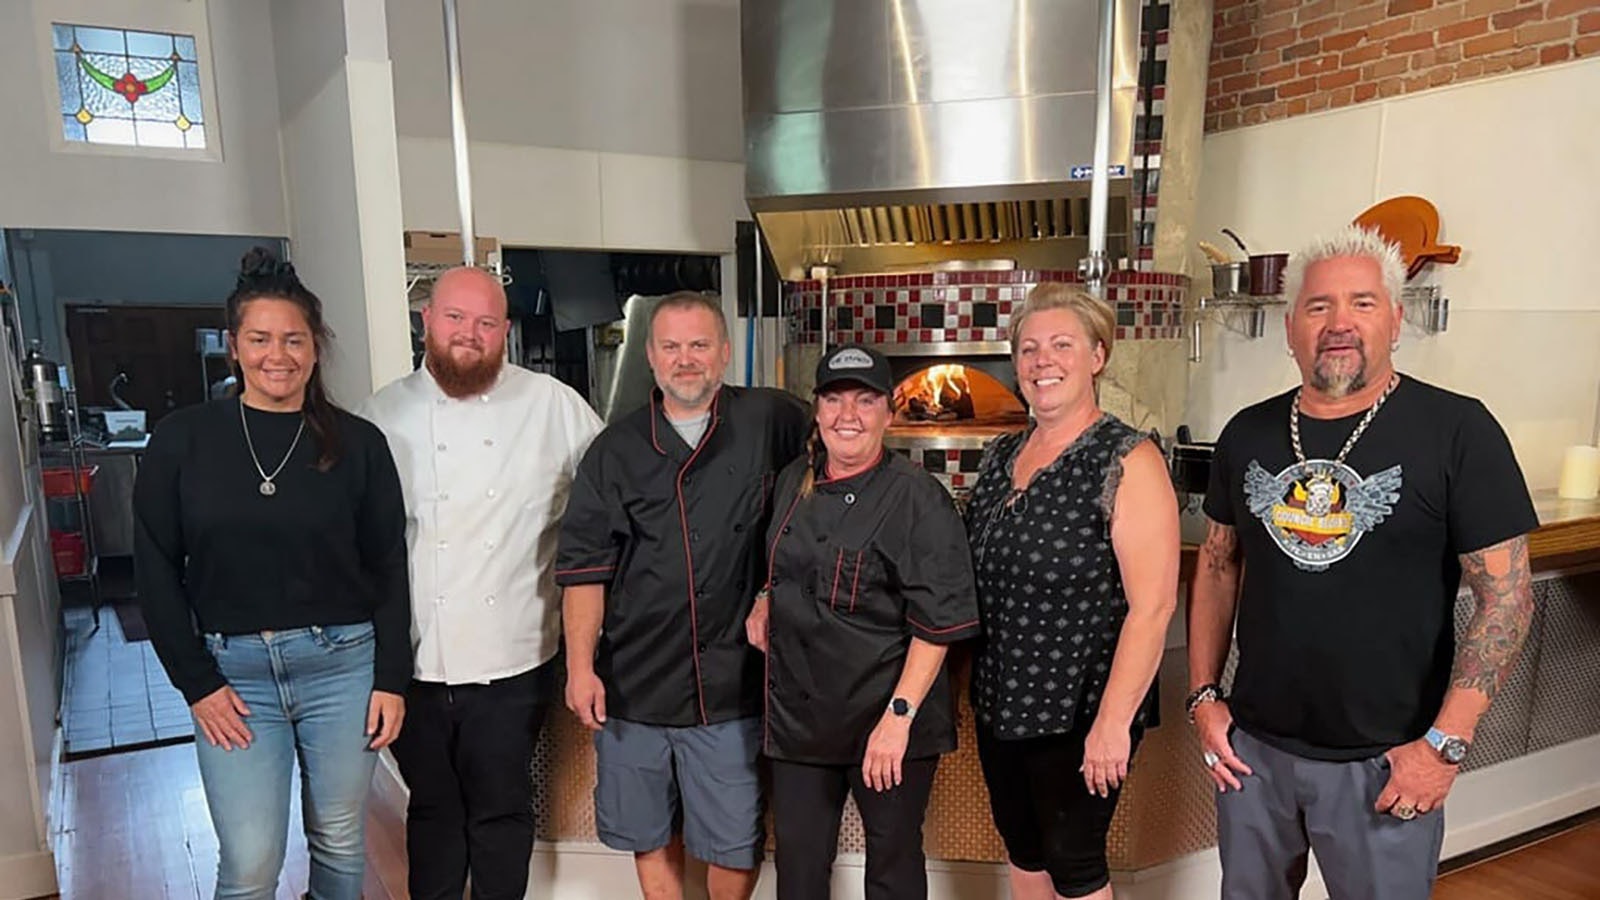 Food Network star Guy Fieri, far right, with the Pie Zanos owner Renée Tiller, center, and her crew in Buffalo, Wyoming.